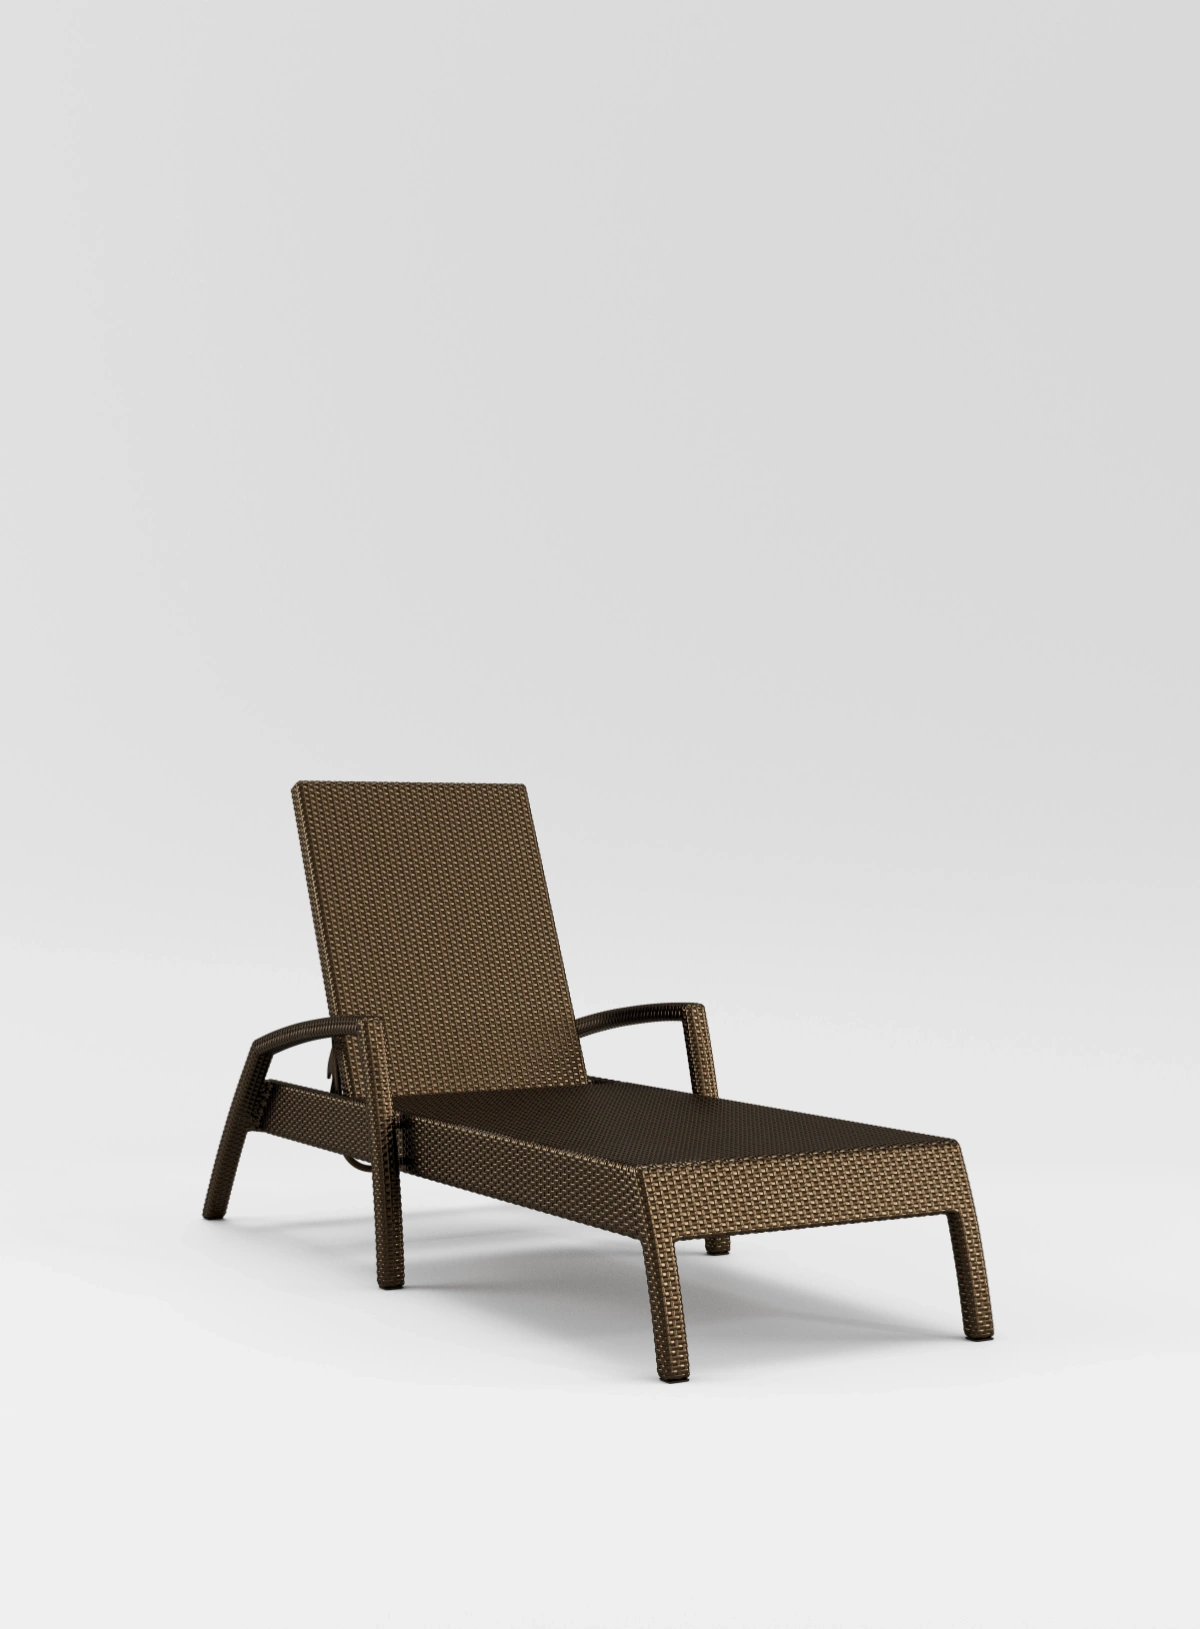 View All Chaise Lounges - Brown Jordan